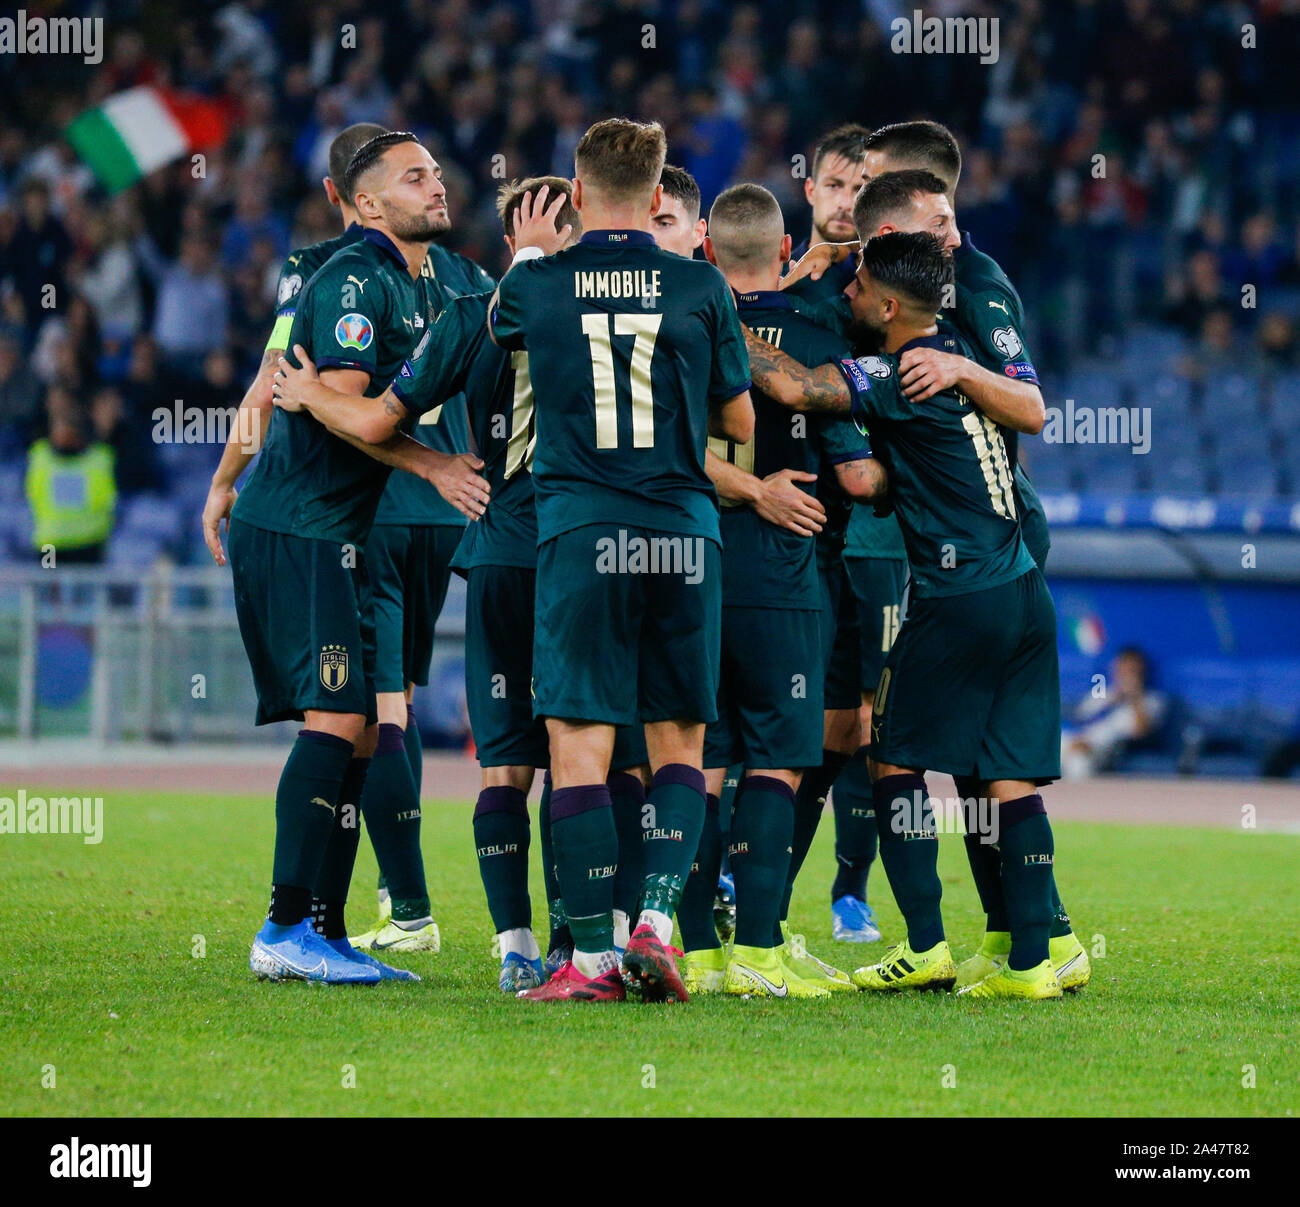 Rome, Italy. . 12th Oct, 2019. 22/10/2019 Rome, Football match between ITALY vs GREECE valid for the European football championships.In picture .ciro Immobile Credit: Fabio Sasso/ZUMA Wire/Alamy Live News Stock Photo